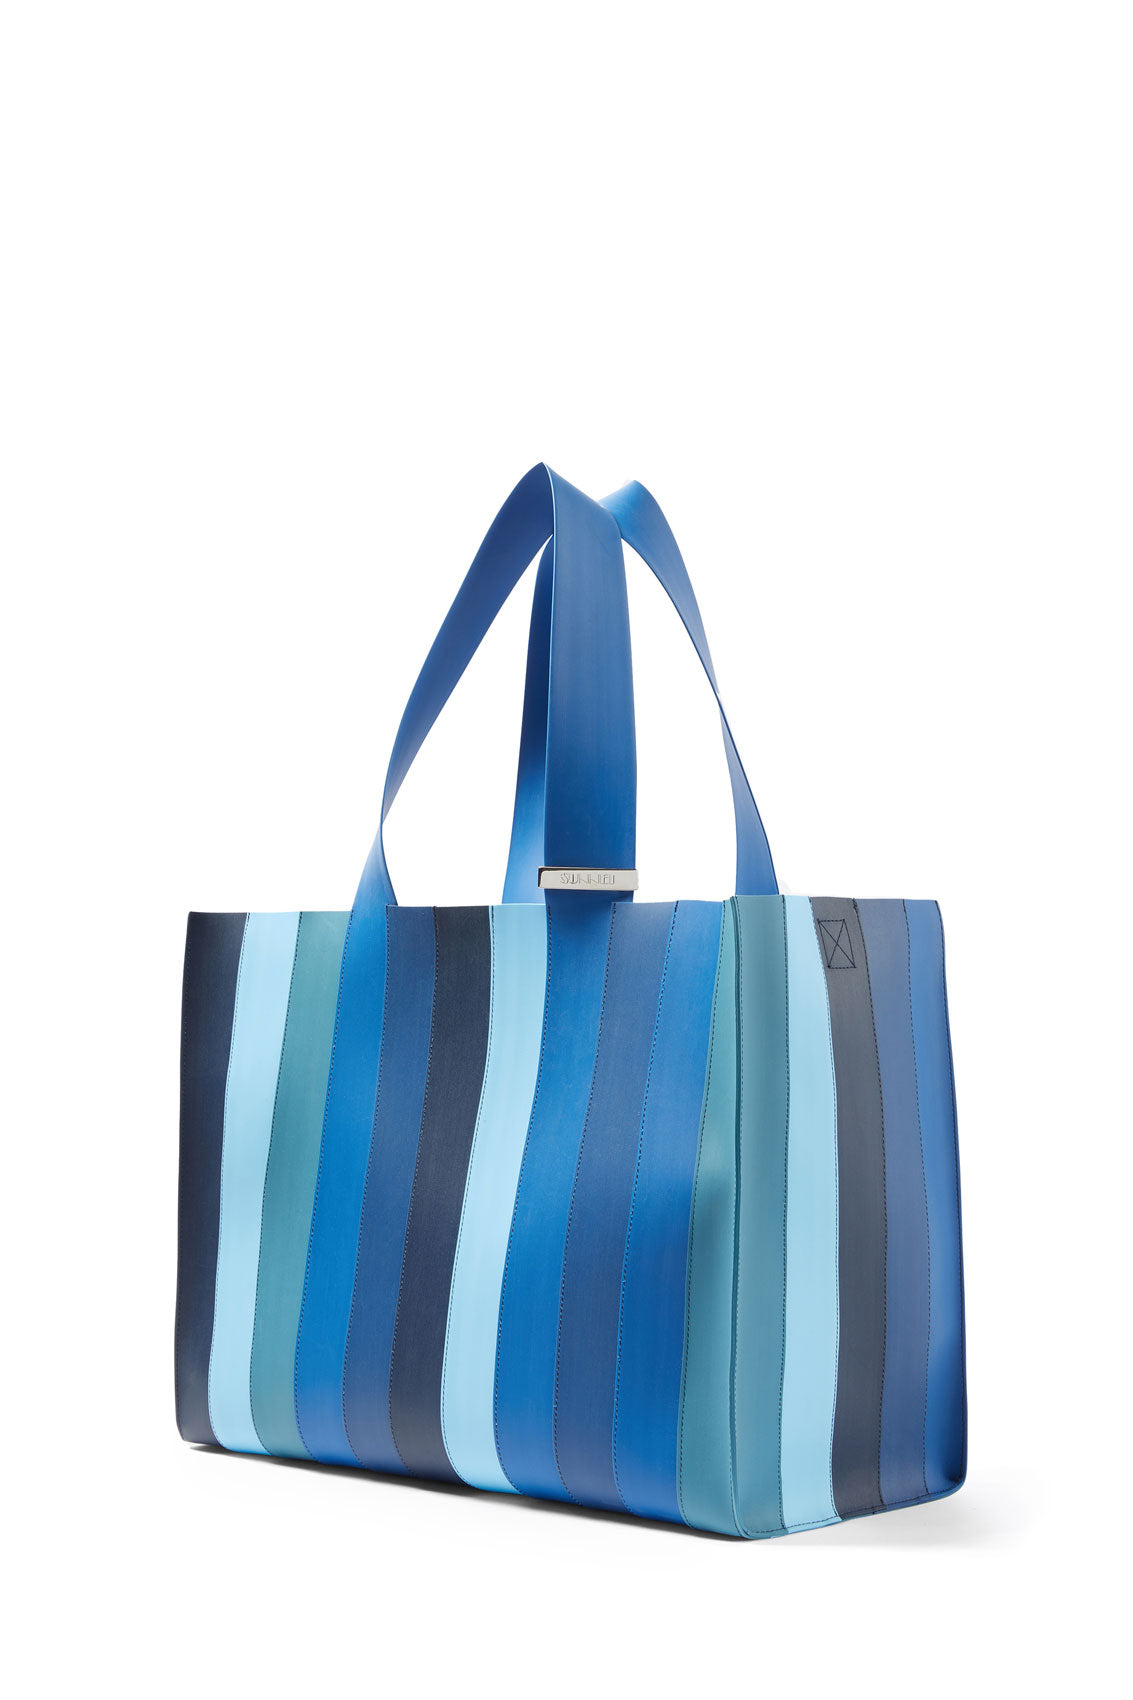 GRADIENT BLUE PUDDING PARALLELEPIPEDO BAG